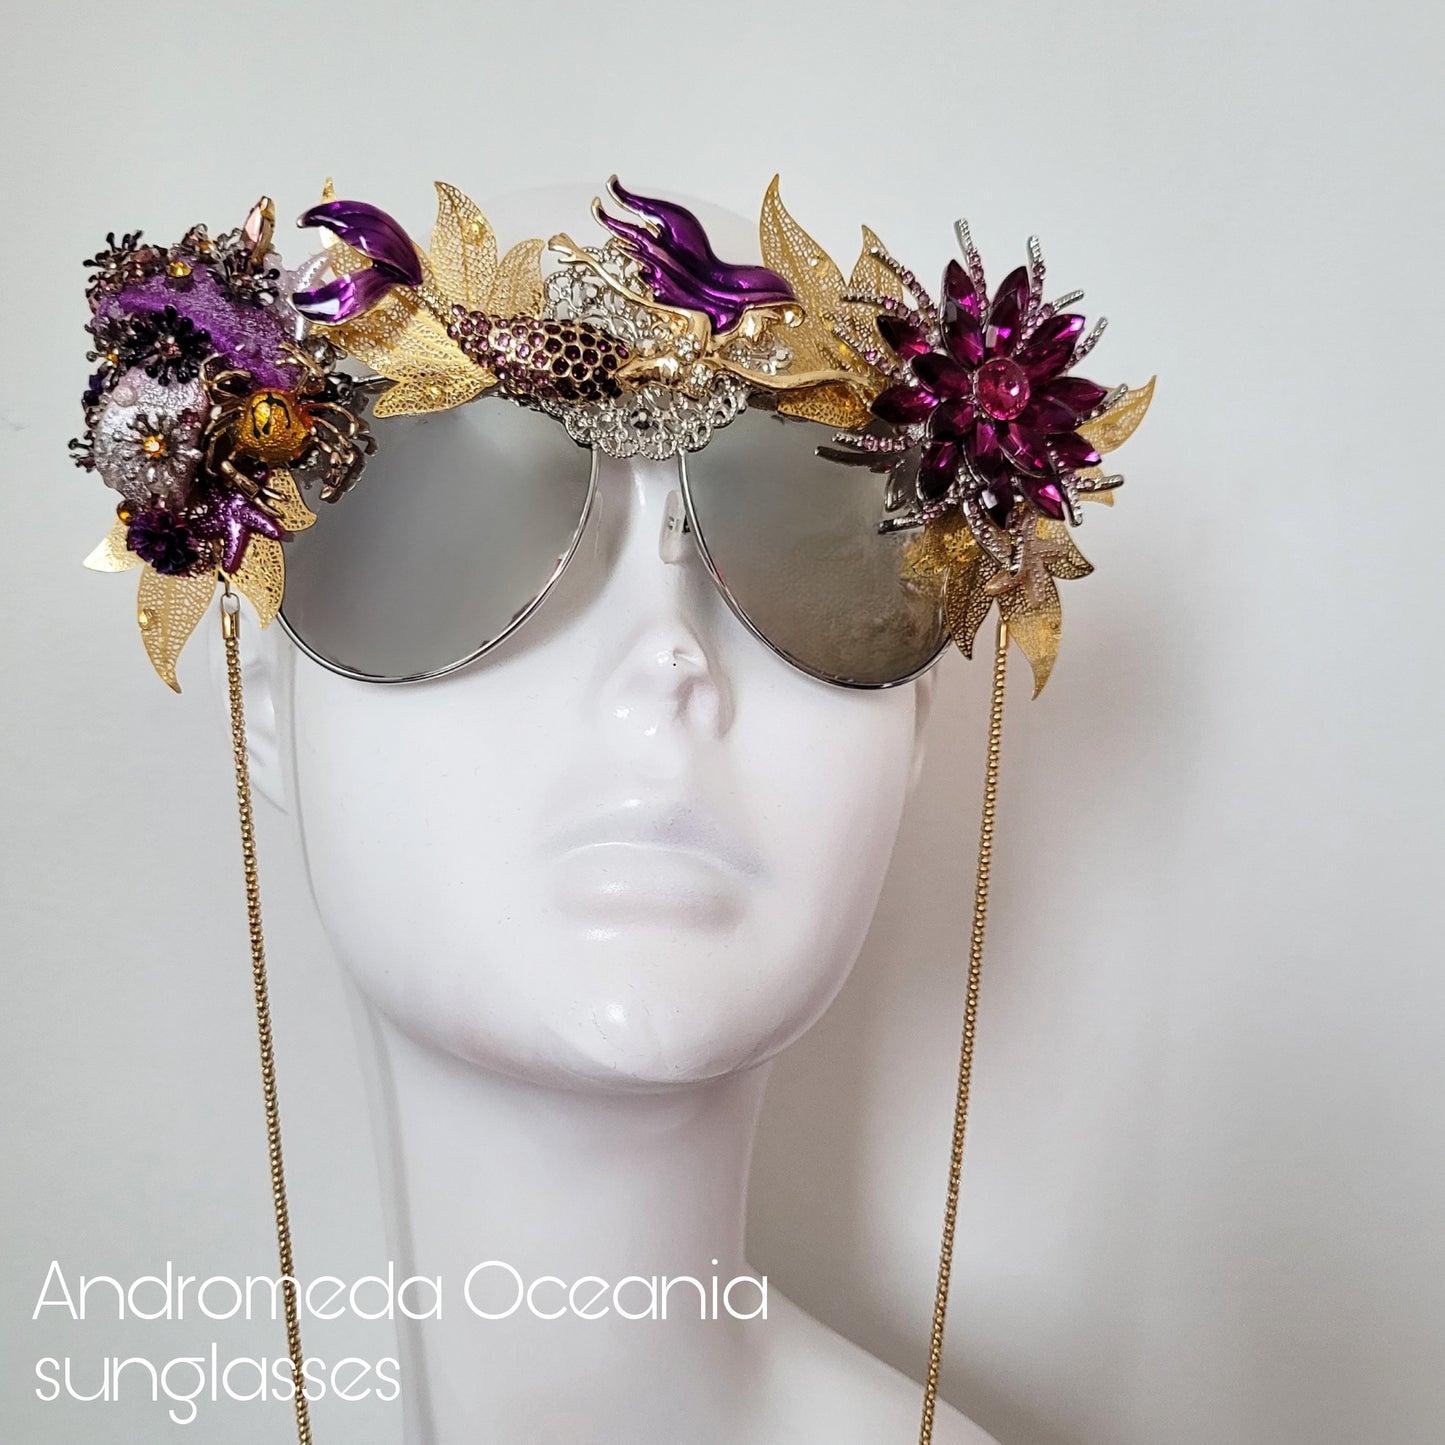 Shifting Depths collection: the Andromeda Oceania sculptural sunglasses